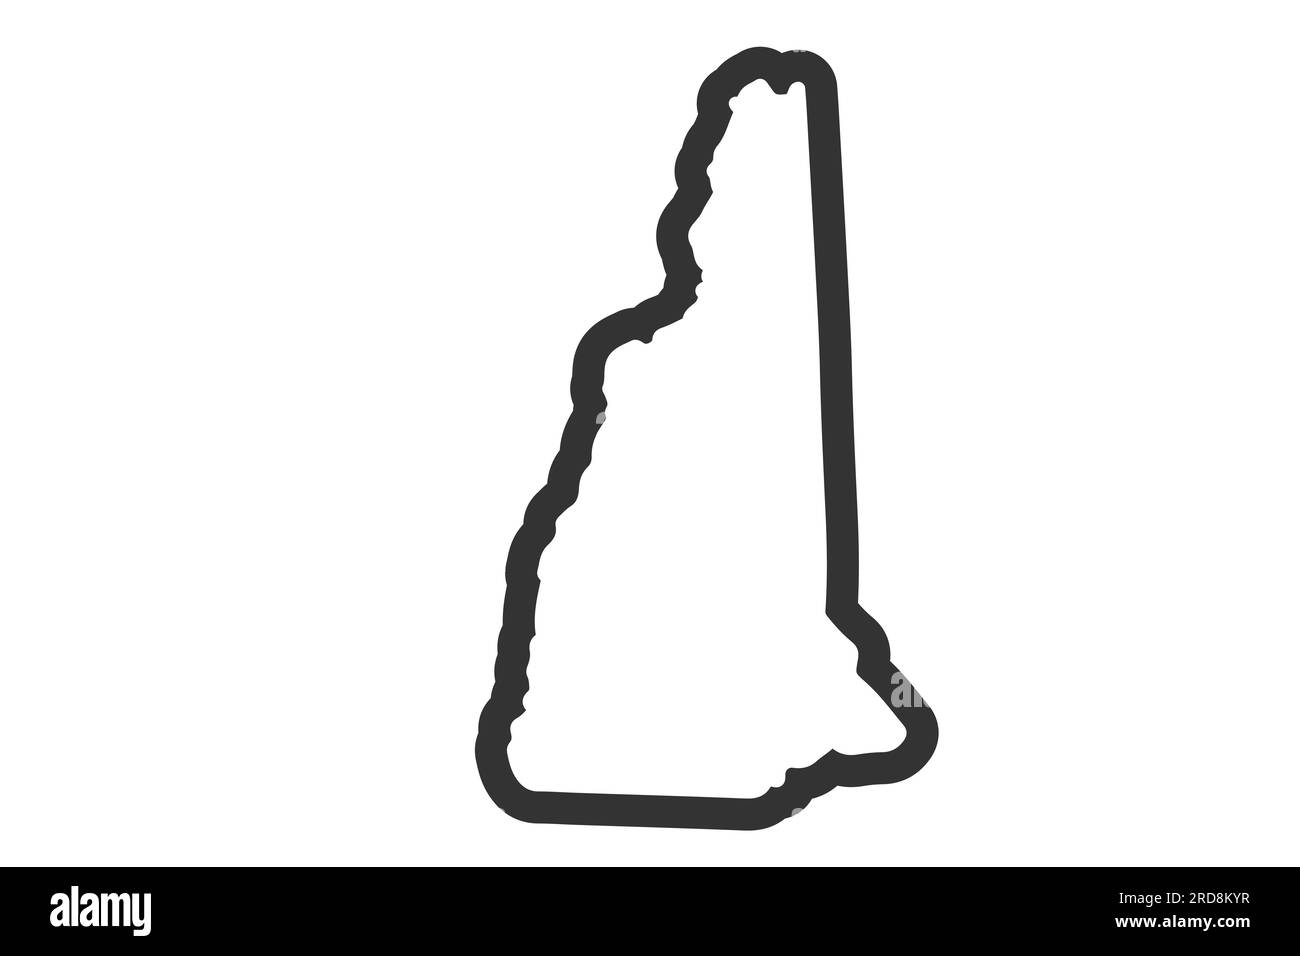 New Hampshire outline symbol. US state map. Vector illustration Stock Vector